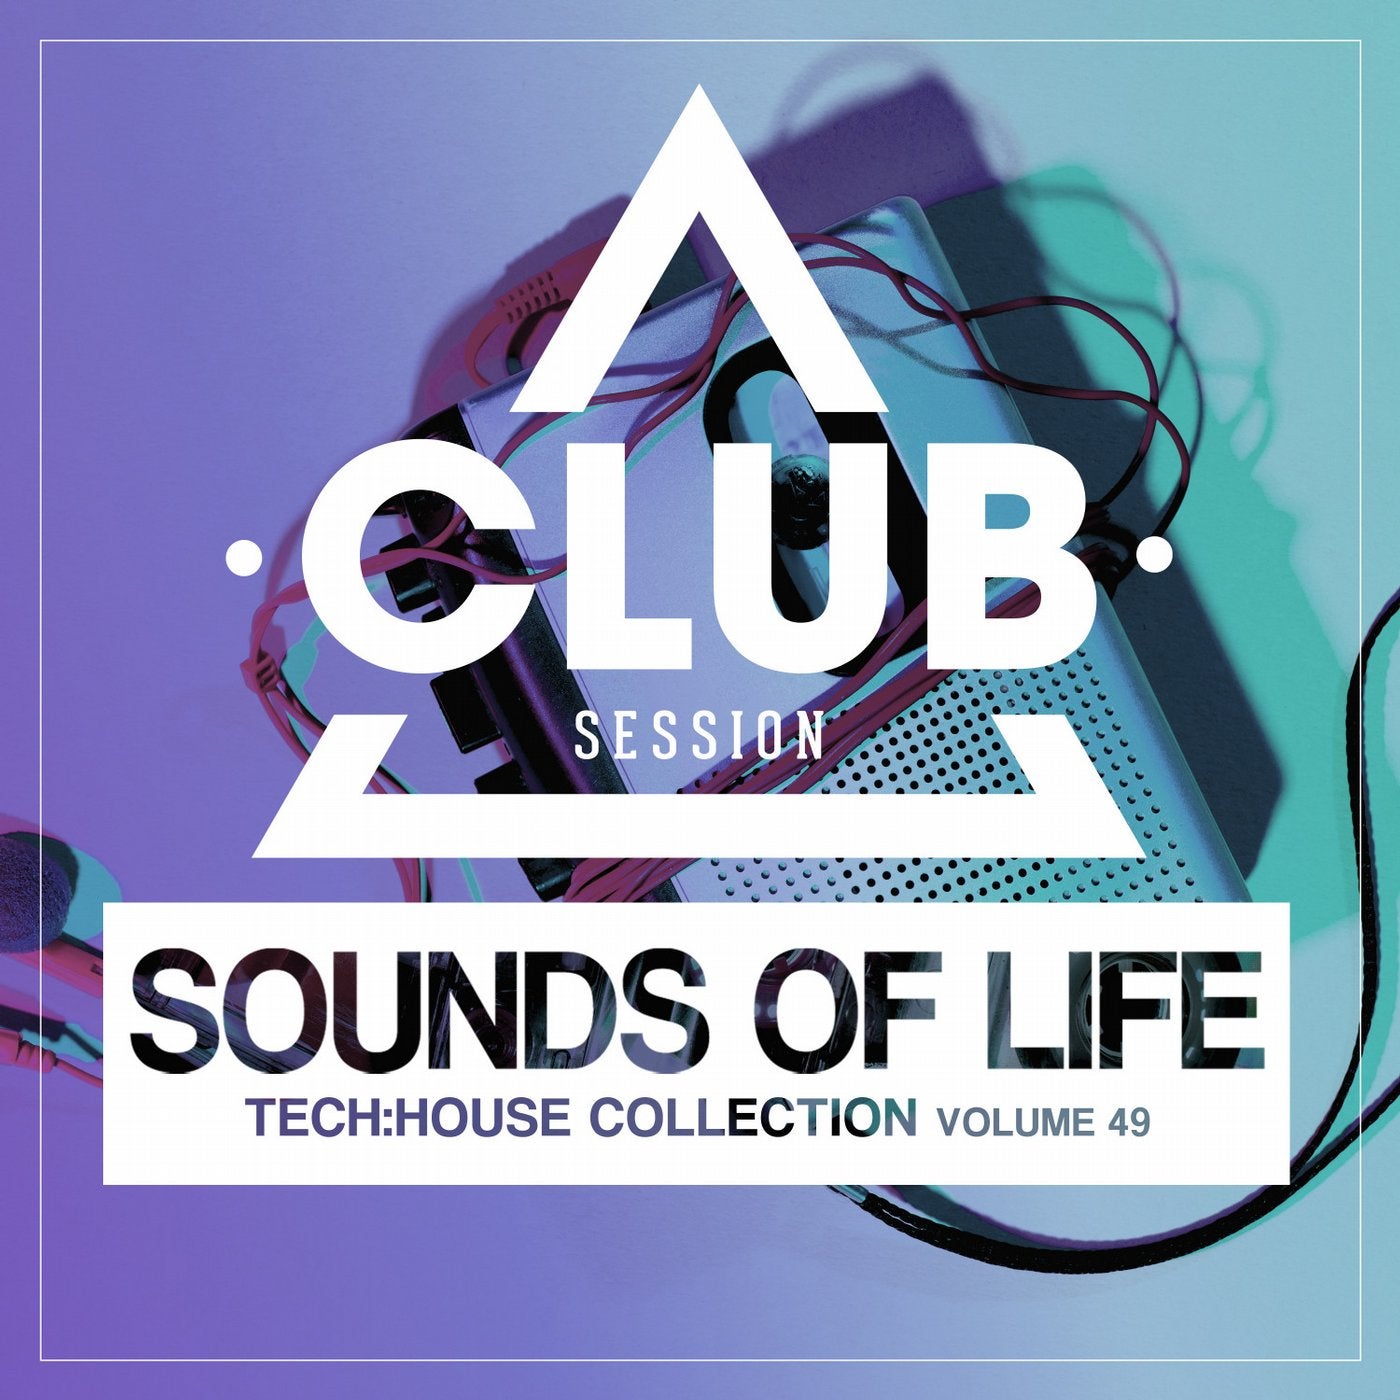 Sounds Of Life - Tech:House Collection Vol. 49